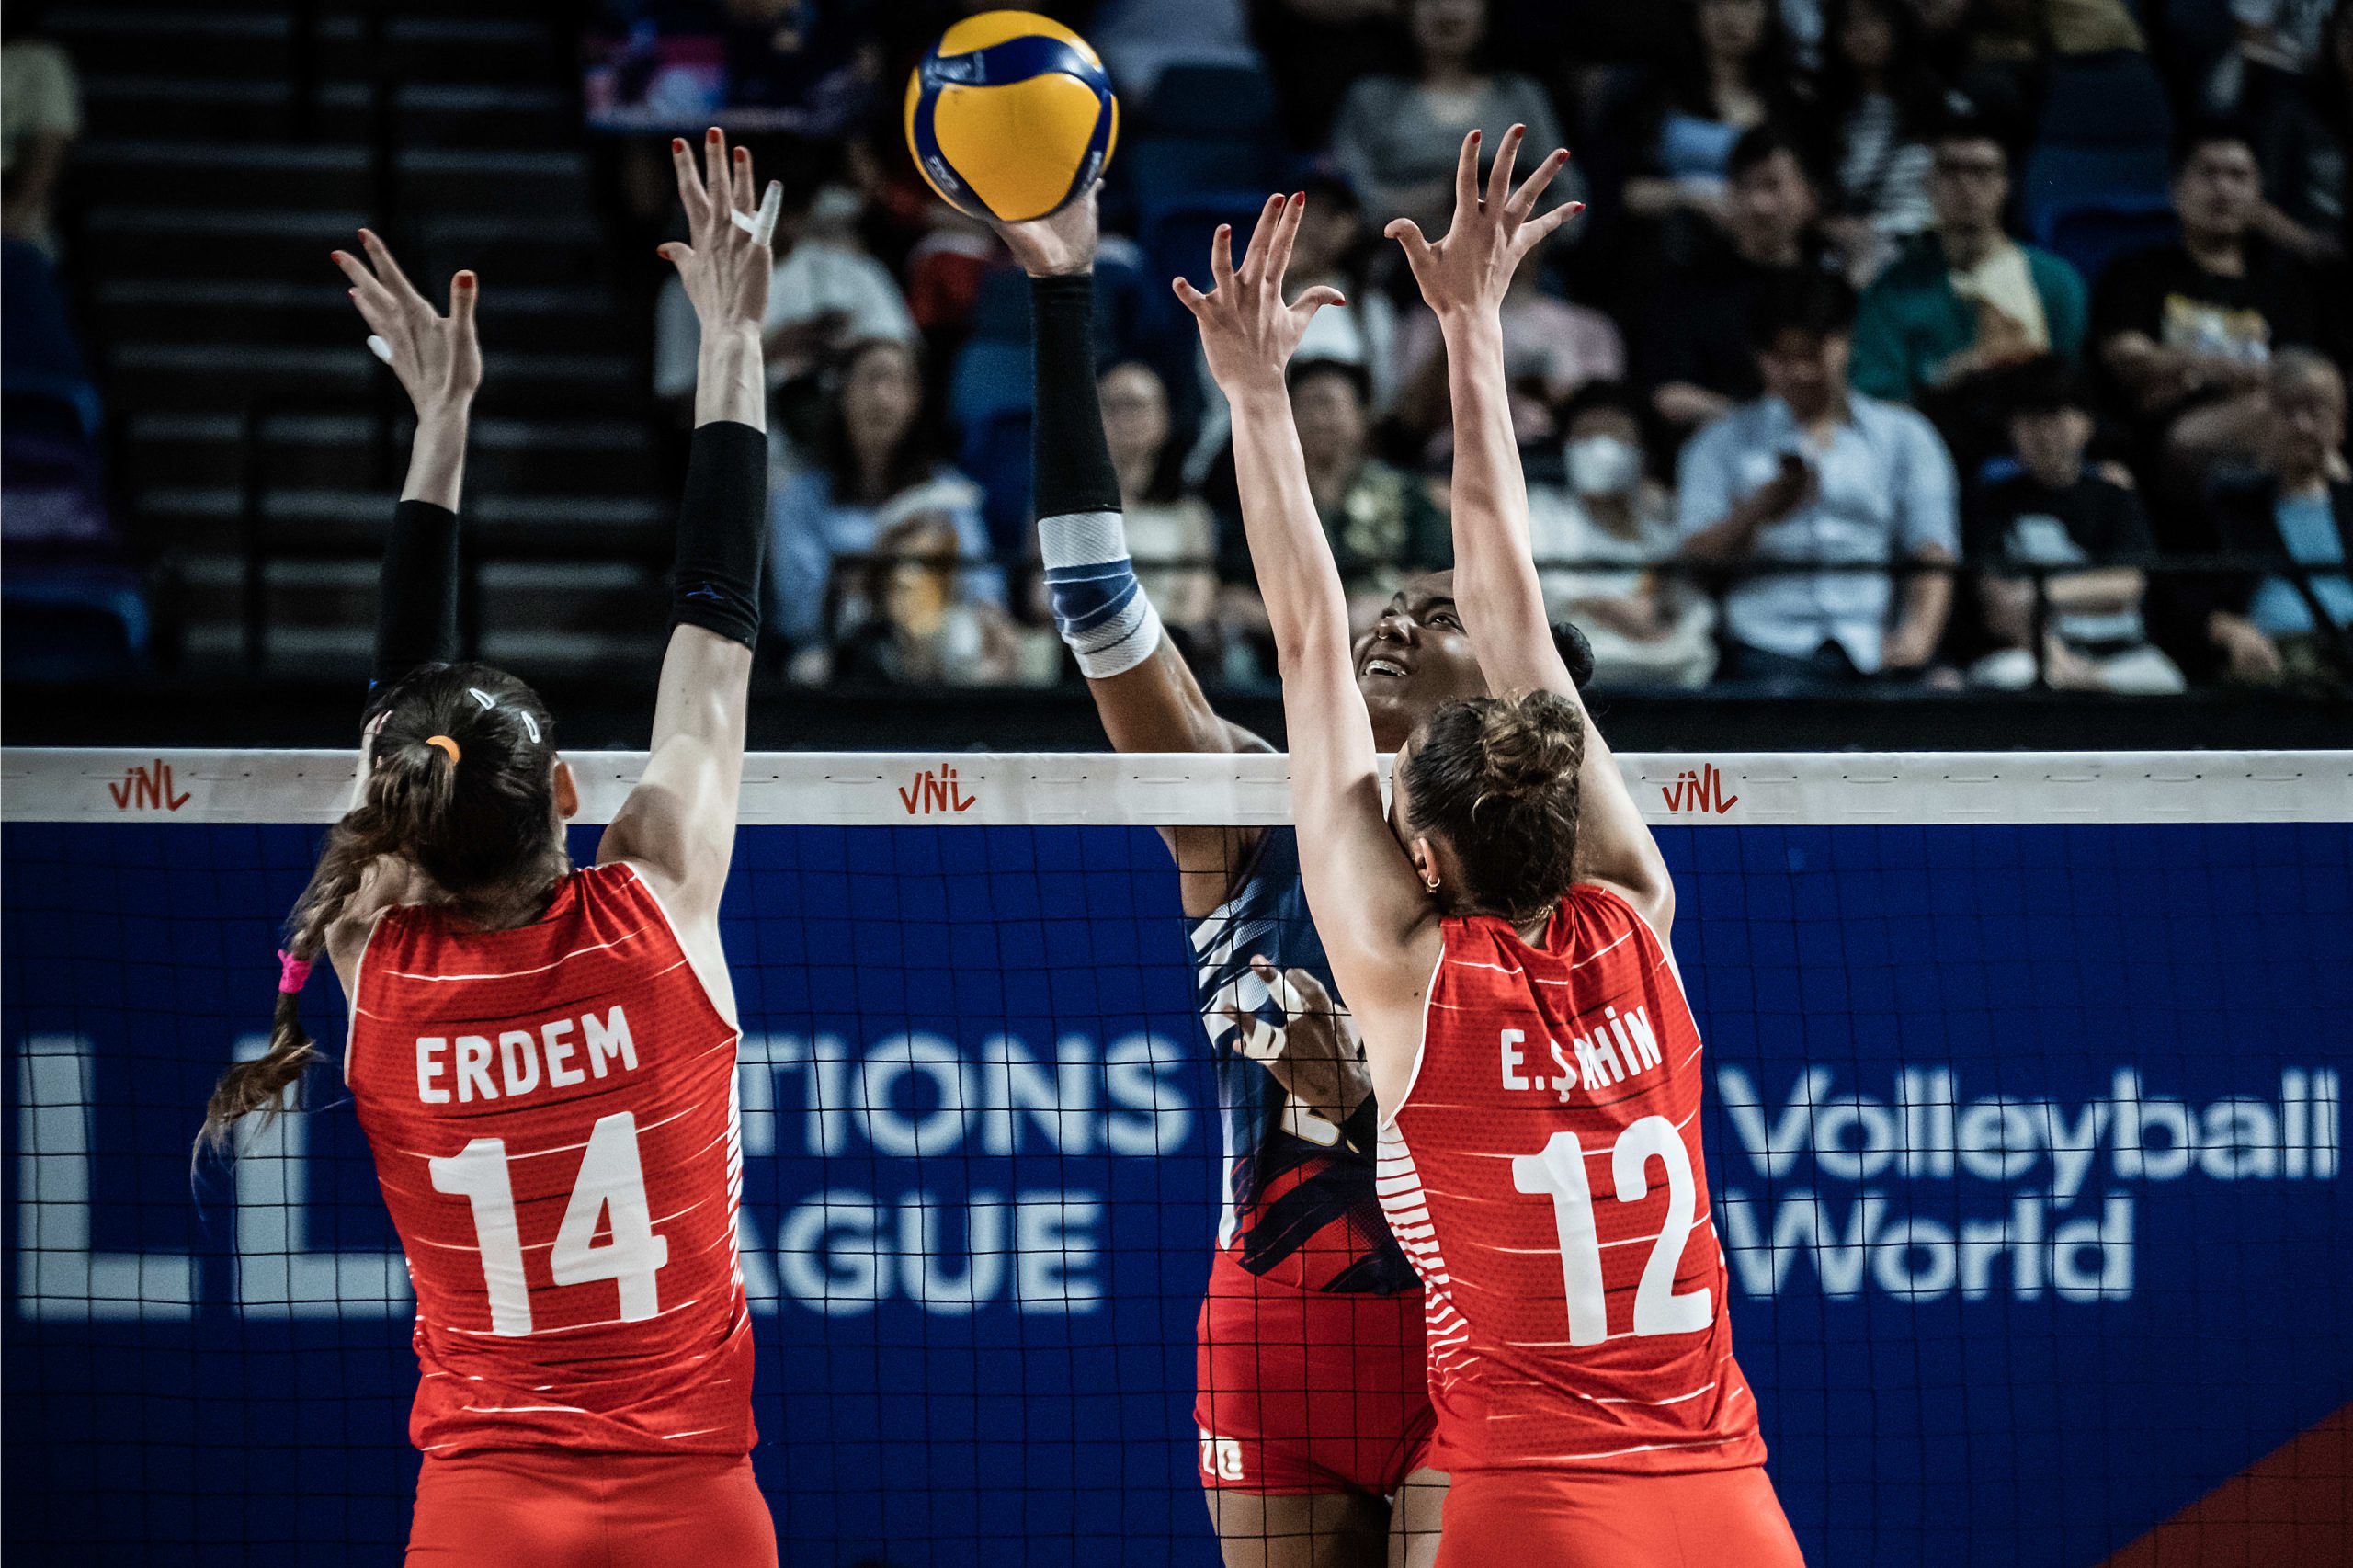 Dominican Republic closes week 2 of VNL in four-set loss to Türkiye